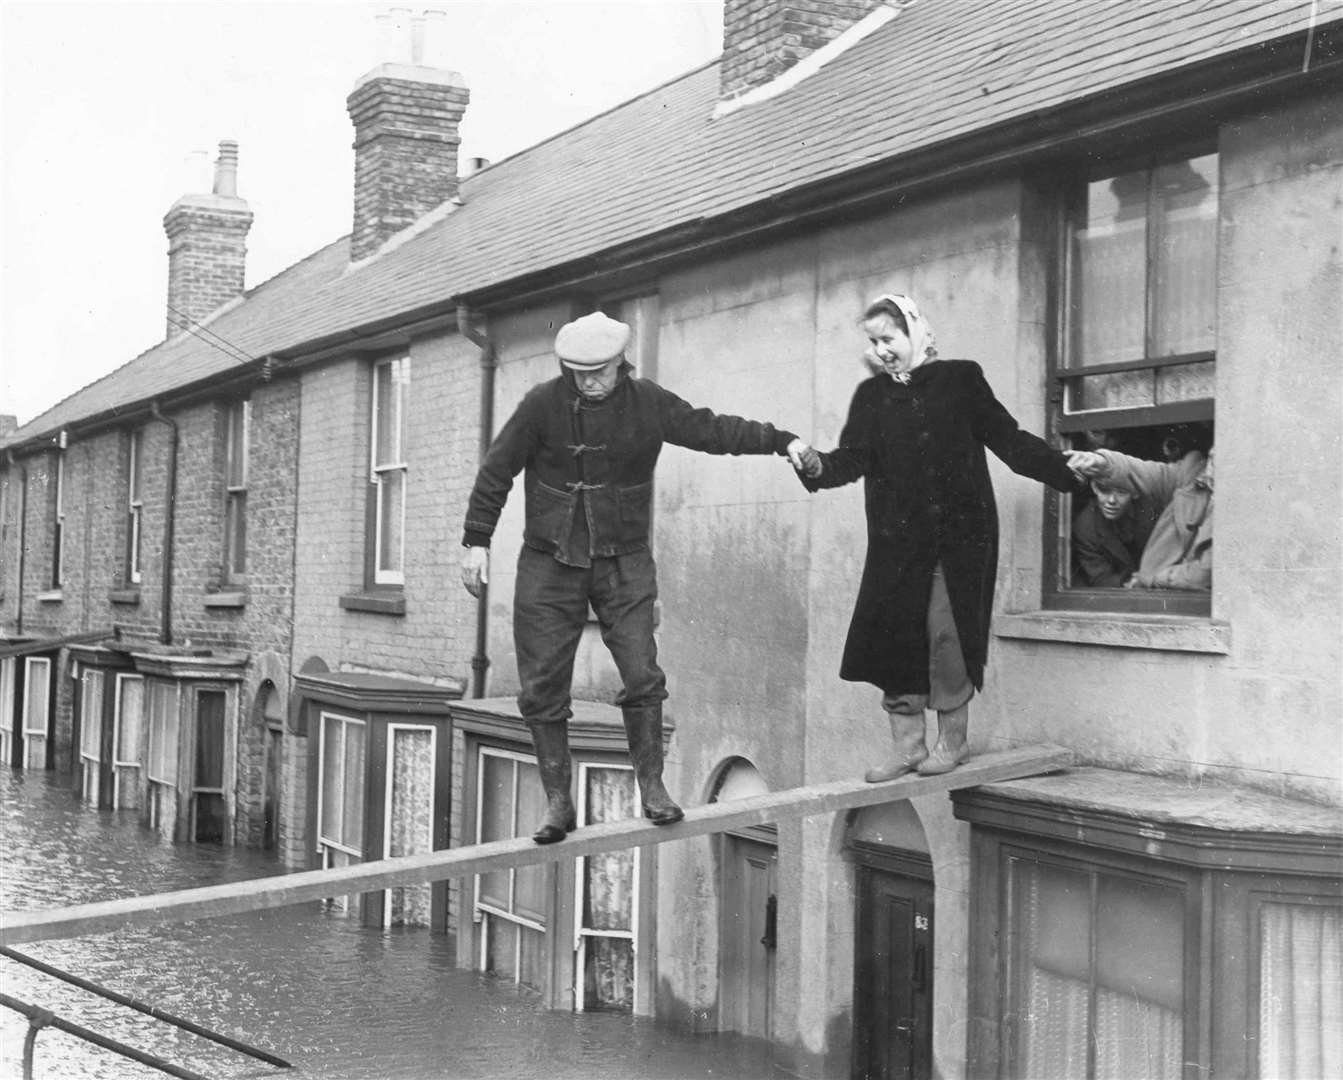 Walking the plank! A woman is rescued from an upstairs room in Island Walk, Whitstable, after horrendous floods hit Kent in 1953